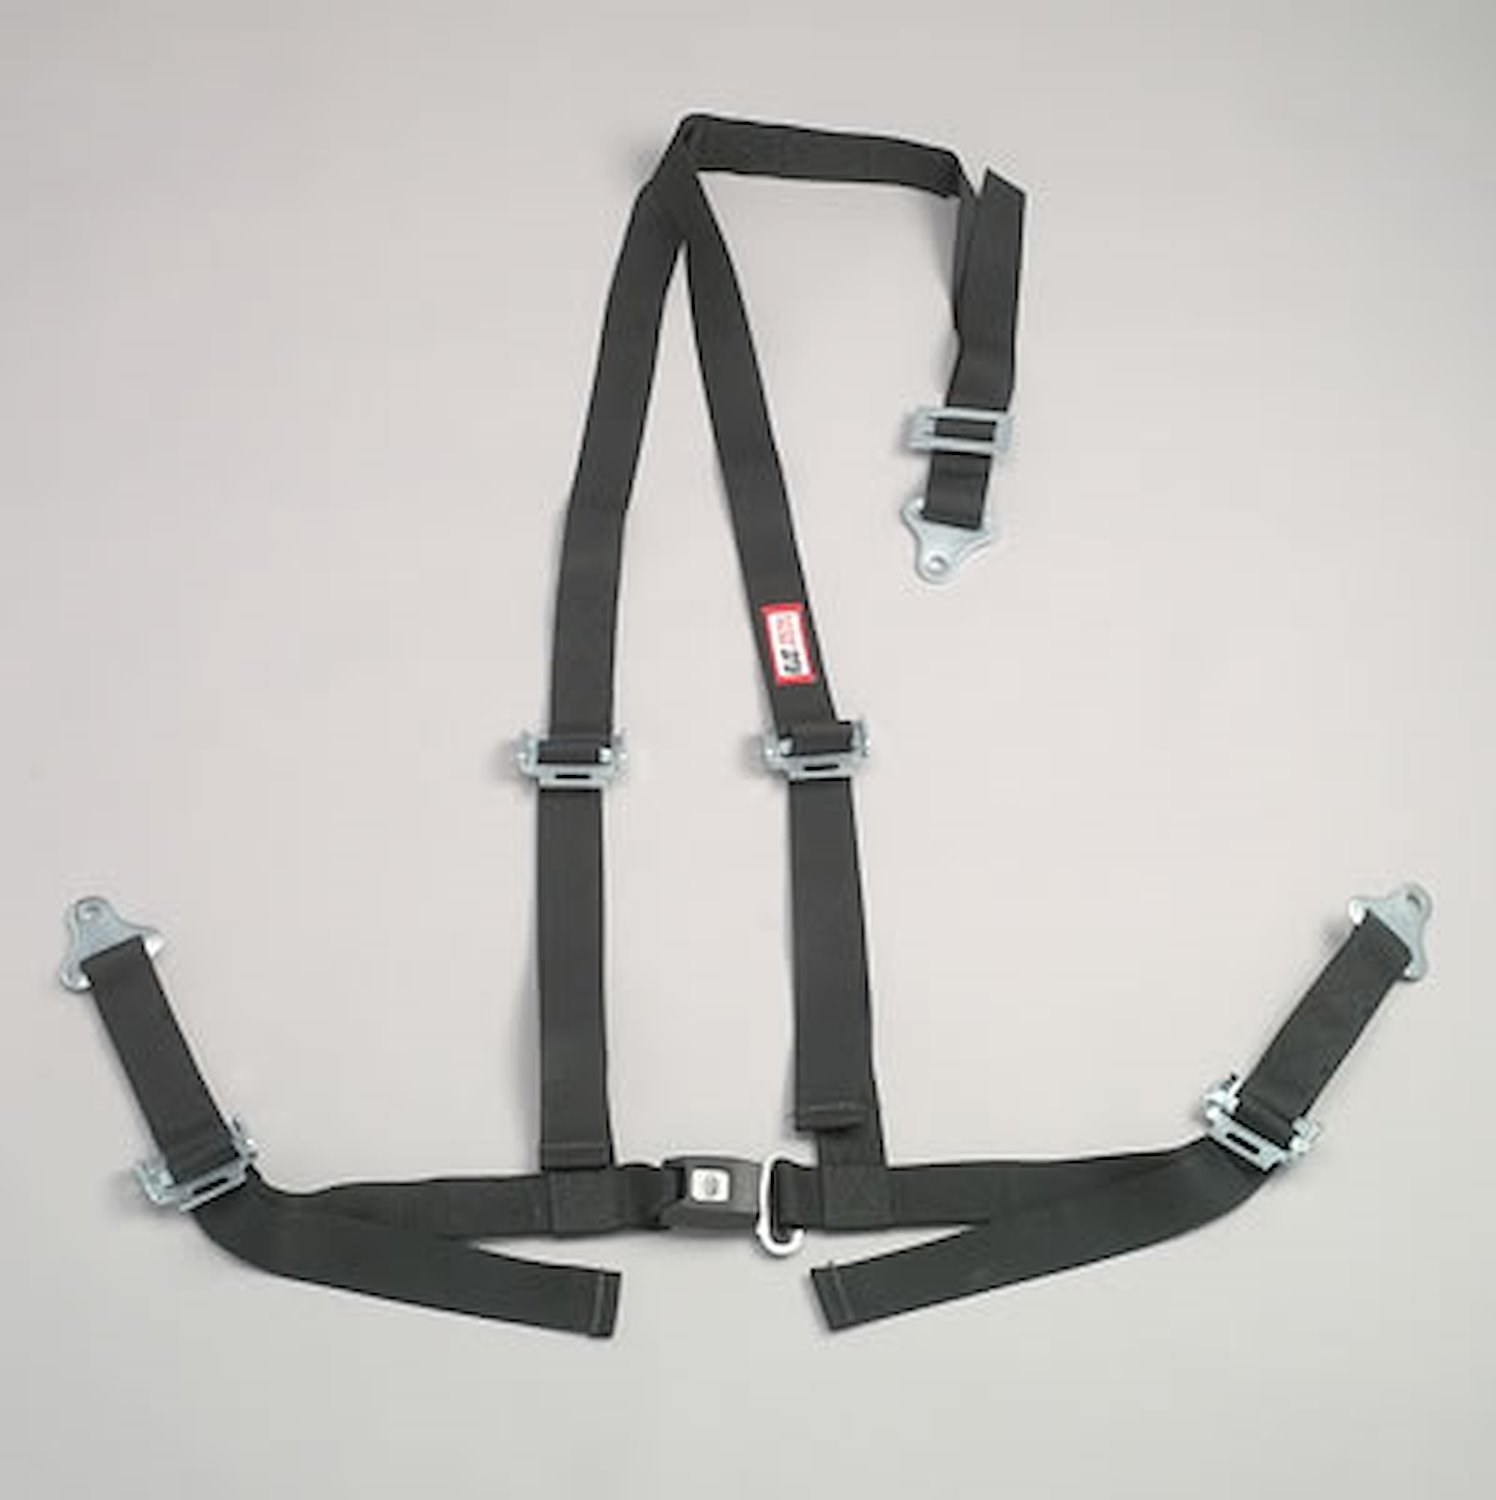 NON-SFI B&T HARNESS 2 PULL DOWN Lap Belt 2 S. H. Individual FLOOR Mount ALL WRAP ENDS w/STERNUM STRAP GRAY